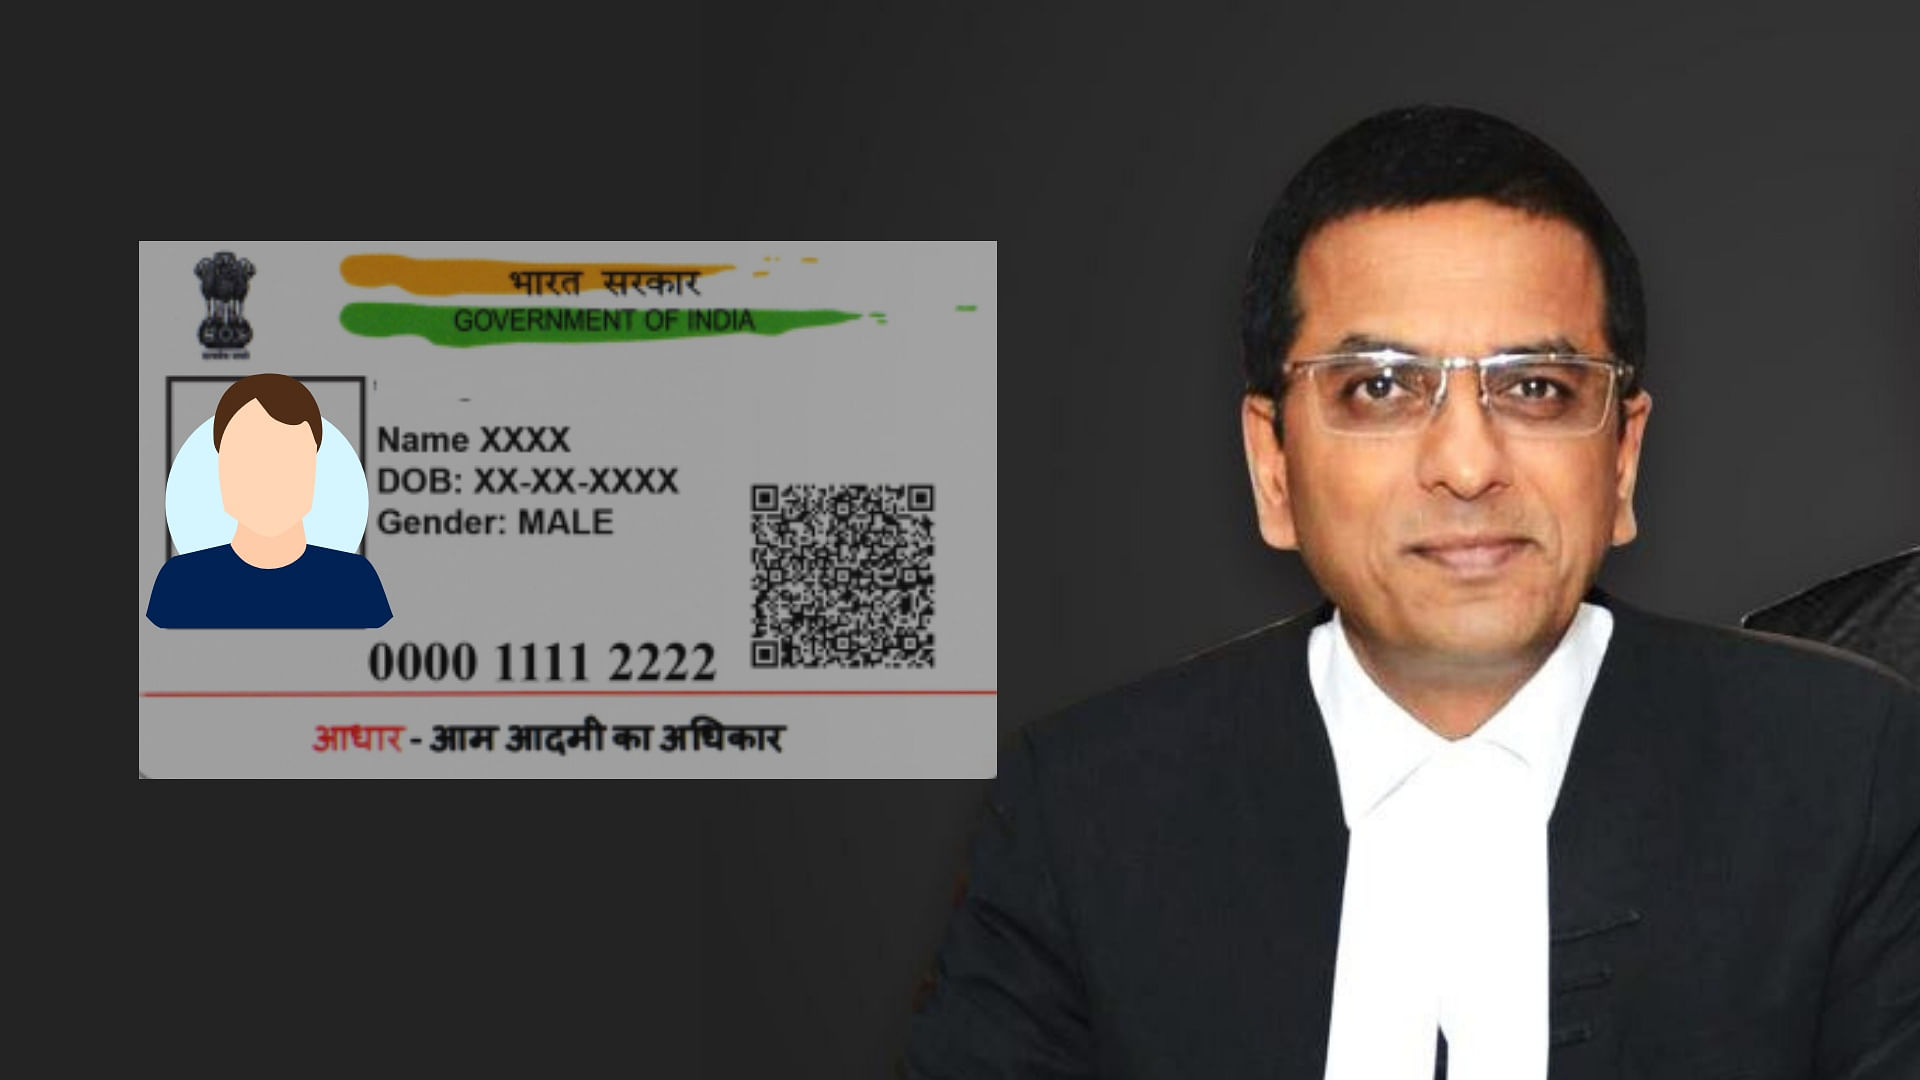 The Jamaica SC followed Justice Chandrachud’s dissent to declare its identification system unconstitutional.&nbsp;